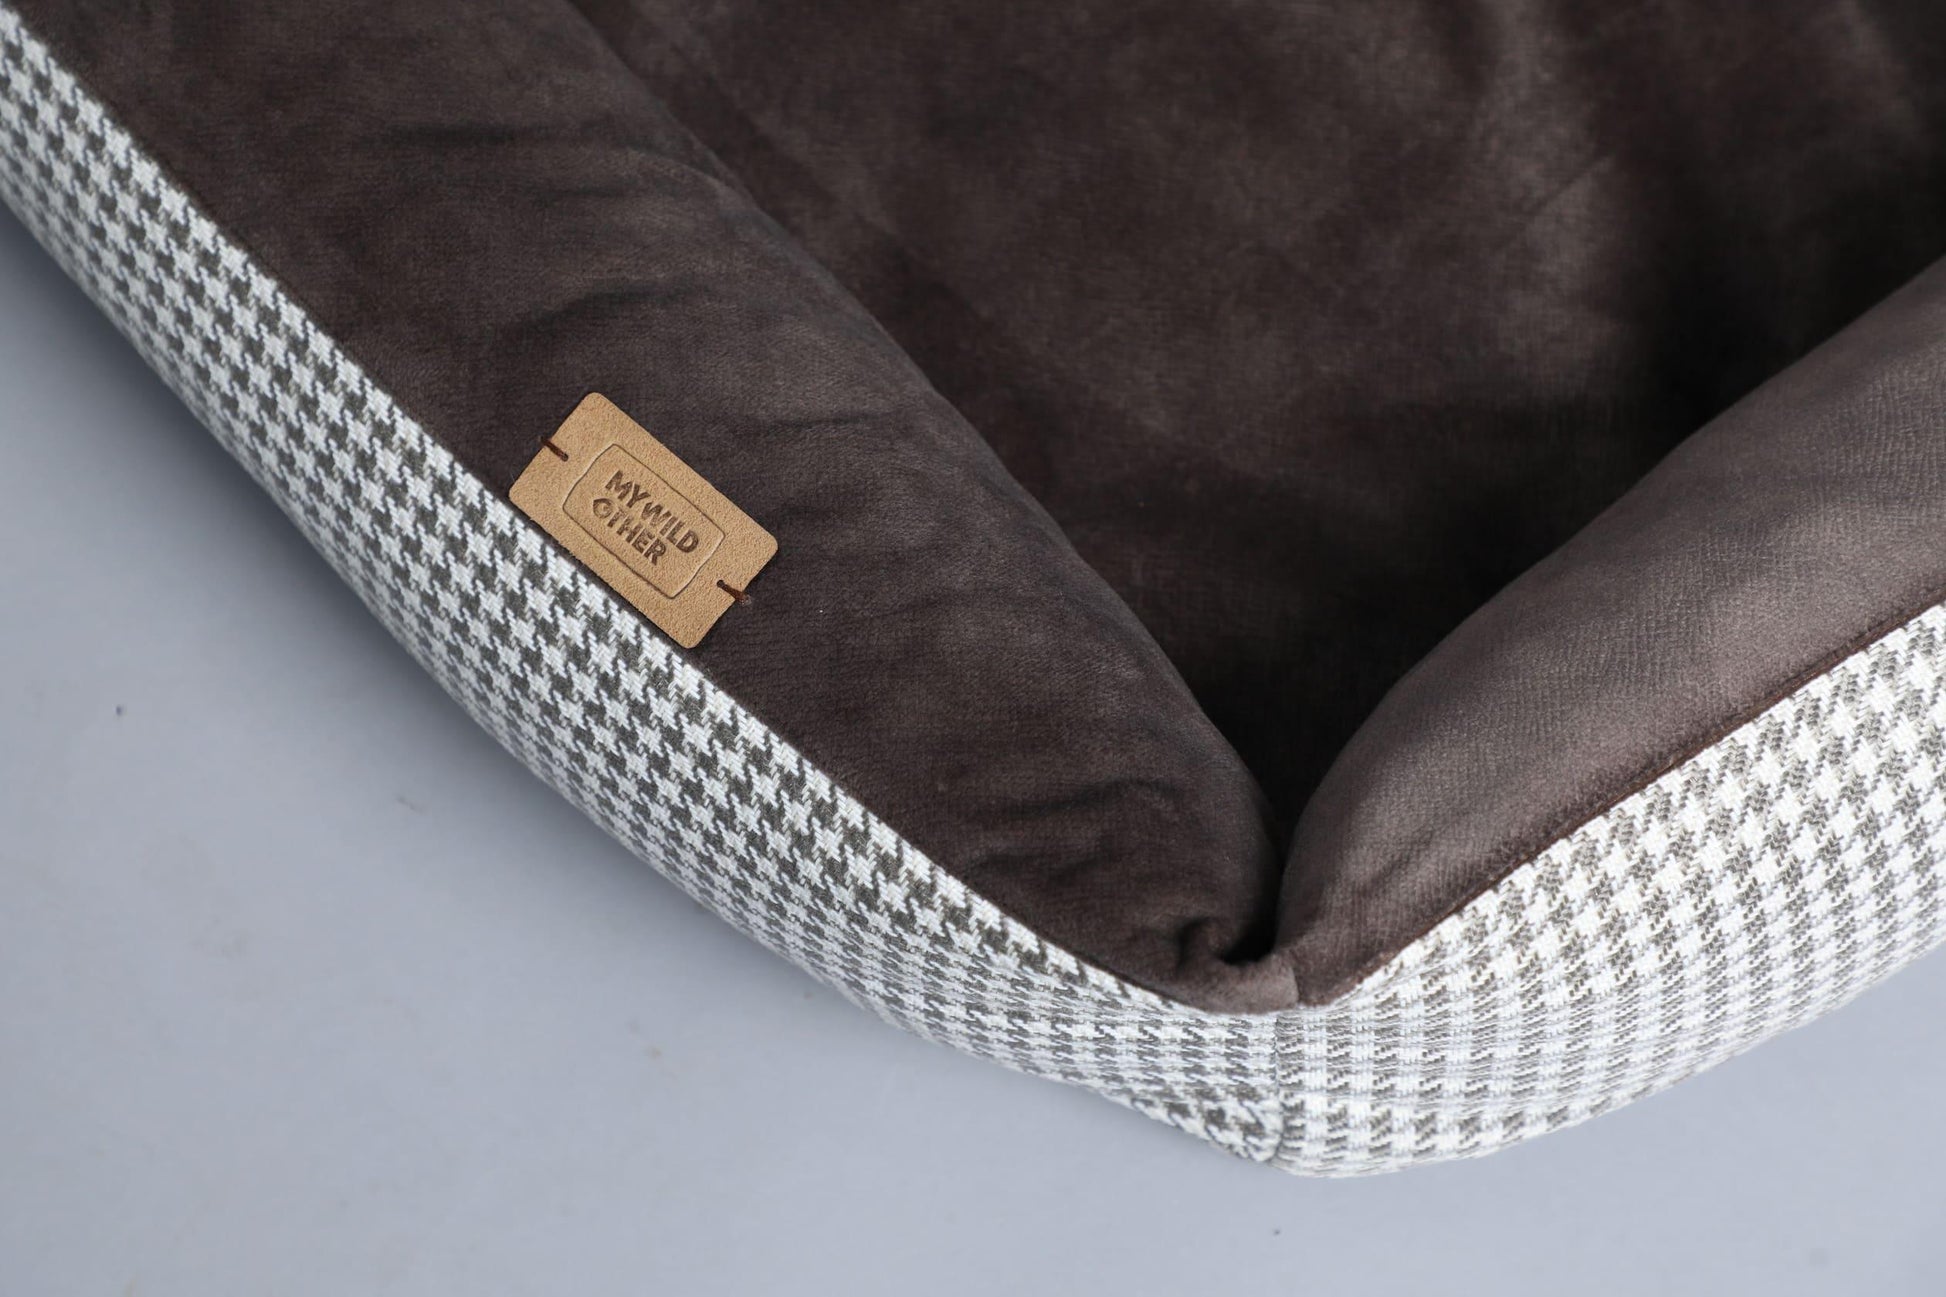 2-sided modern style dog bed. HOUNDSTOOTH+TAUPE - European handmade dog accessories by My Wild Other